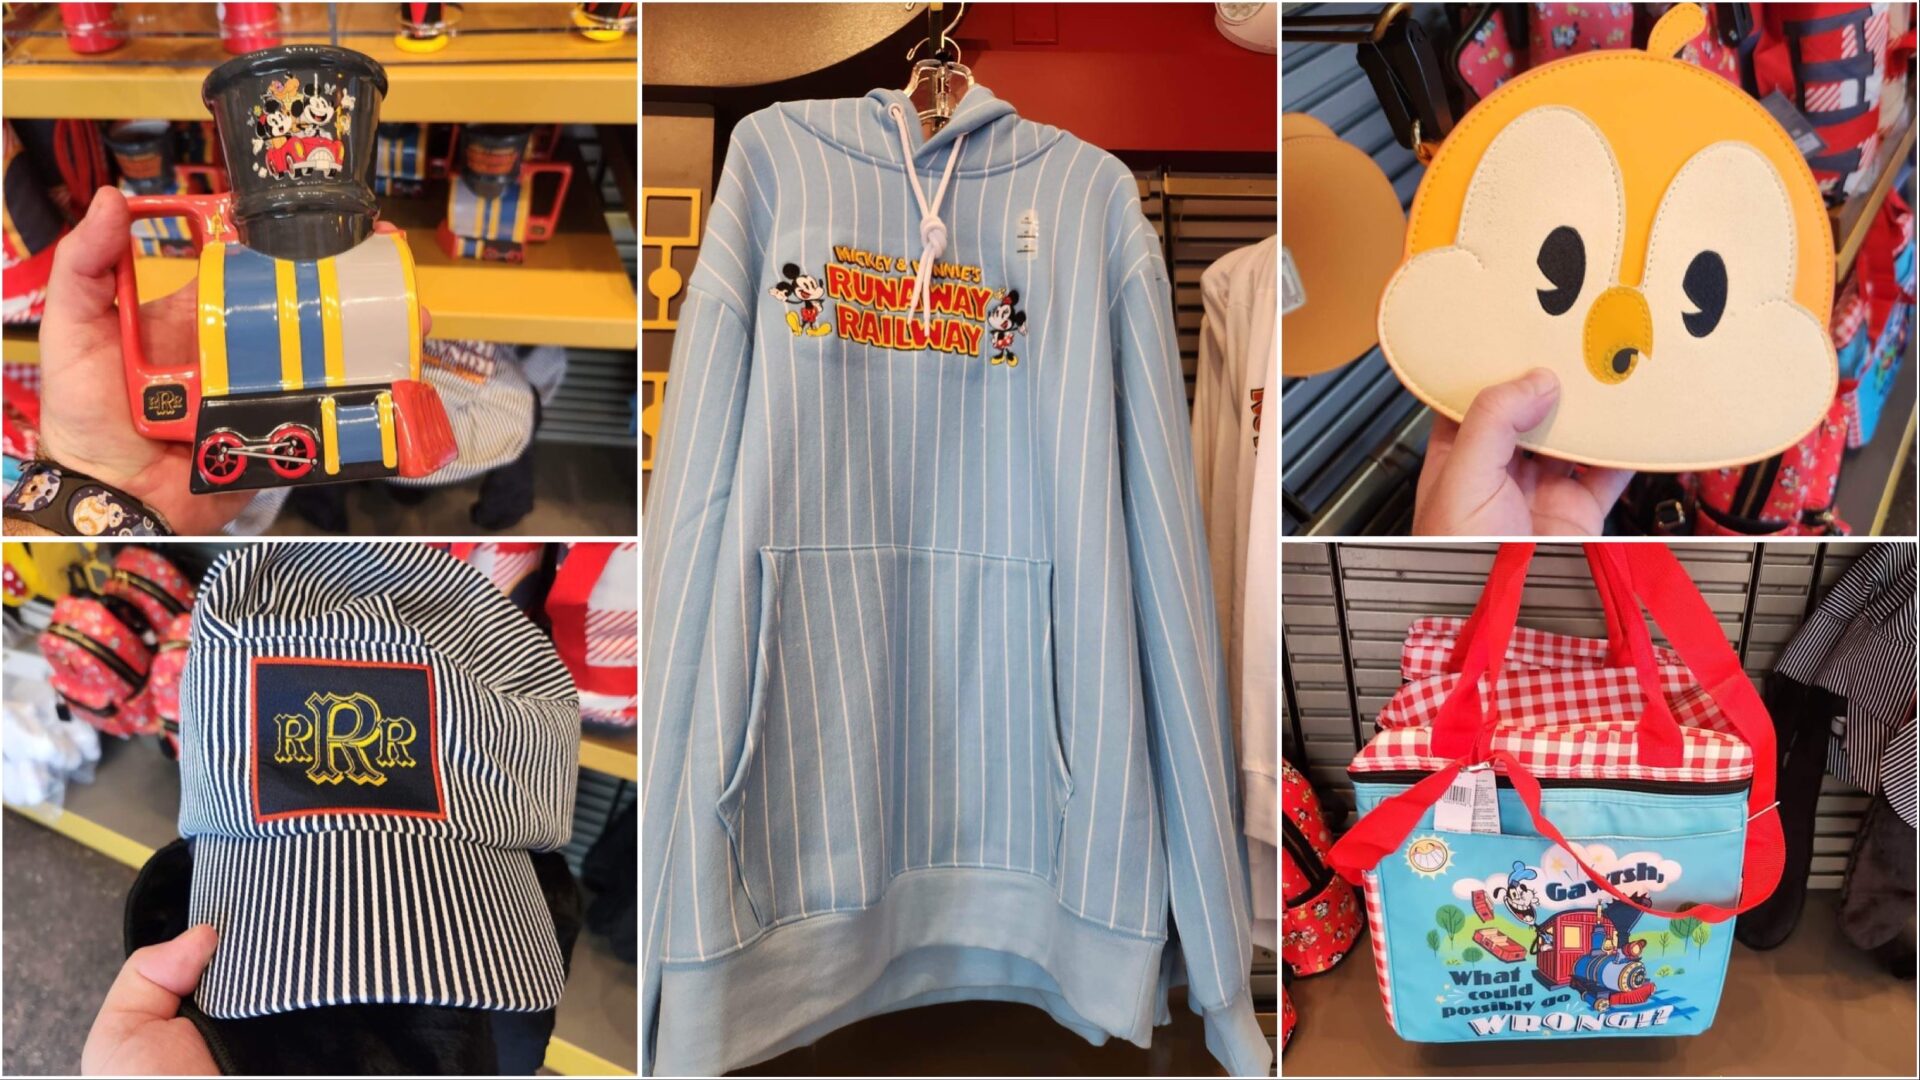 New Mickey’s Toontown Merchandise To Celebrate The Opening Of The New Animated Neighborhood At Disneyland!